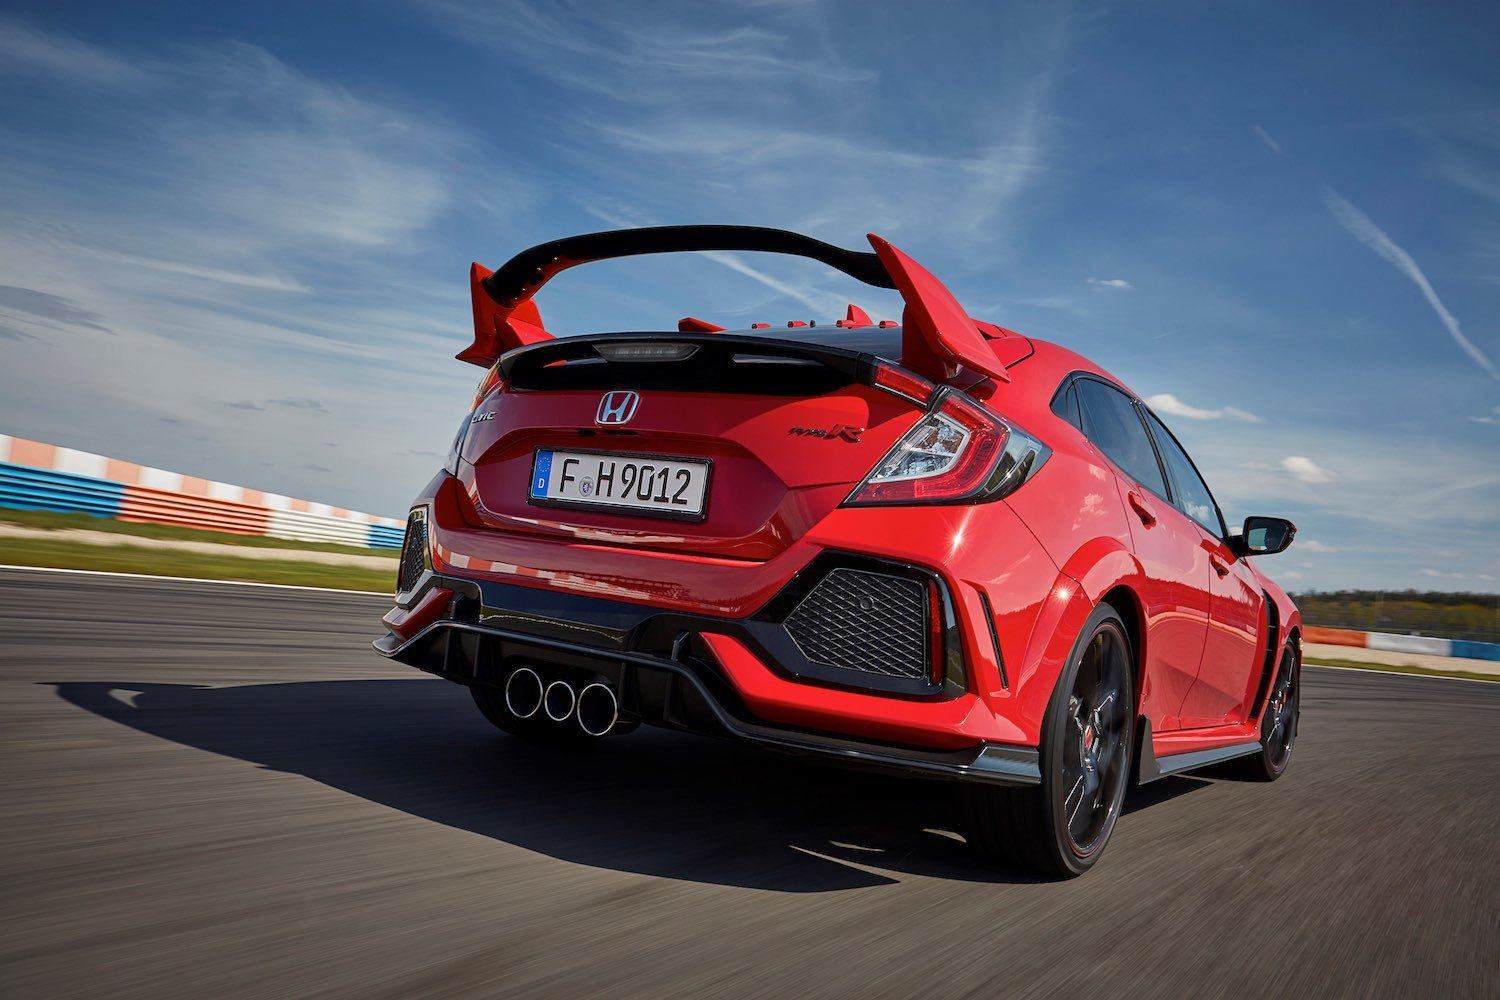 Tim Barnes-Clay reviews the 2018 Honda Civic Type R at the first drives 12